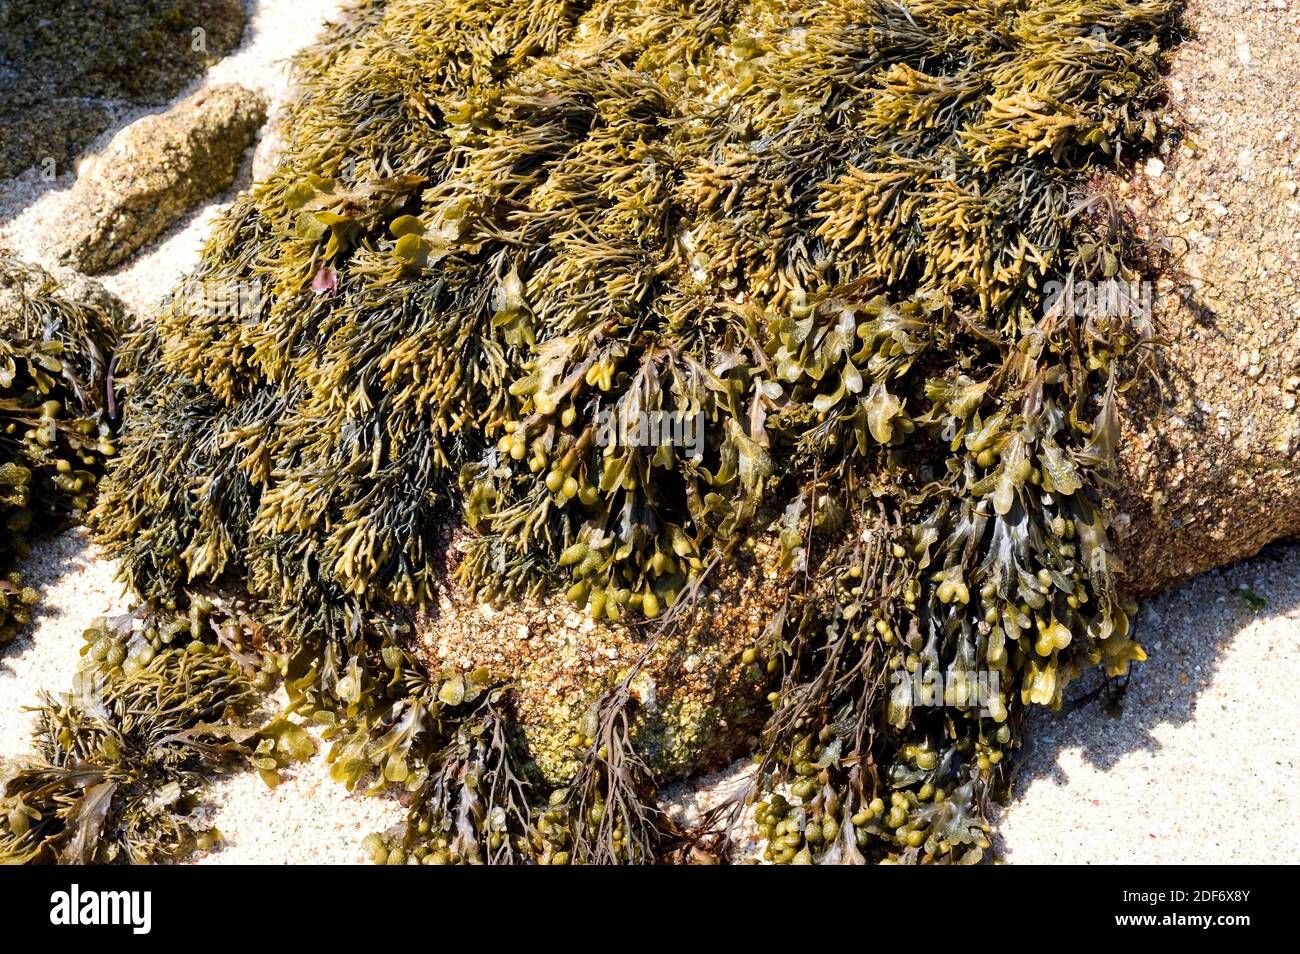 Above green sea fingers (Codium fragile) and under spiral wrack (Fucus spiralis) two brown algae. This photo was taken in Brittany, France. Stock Photo